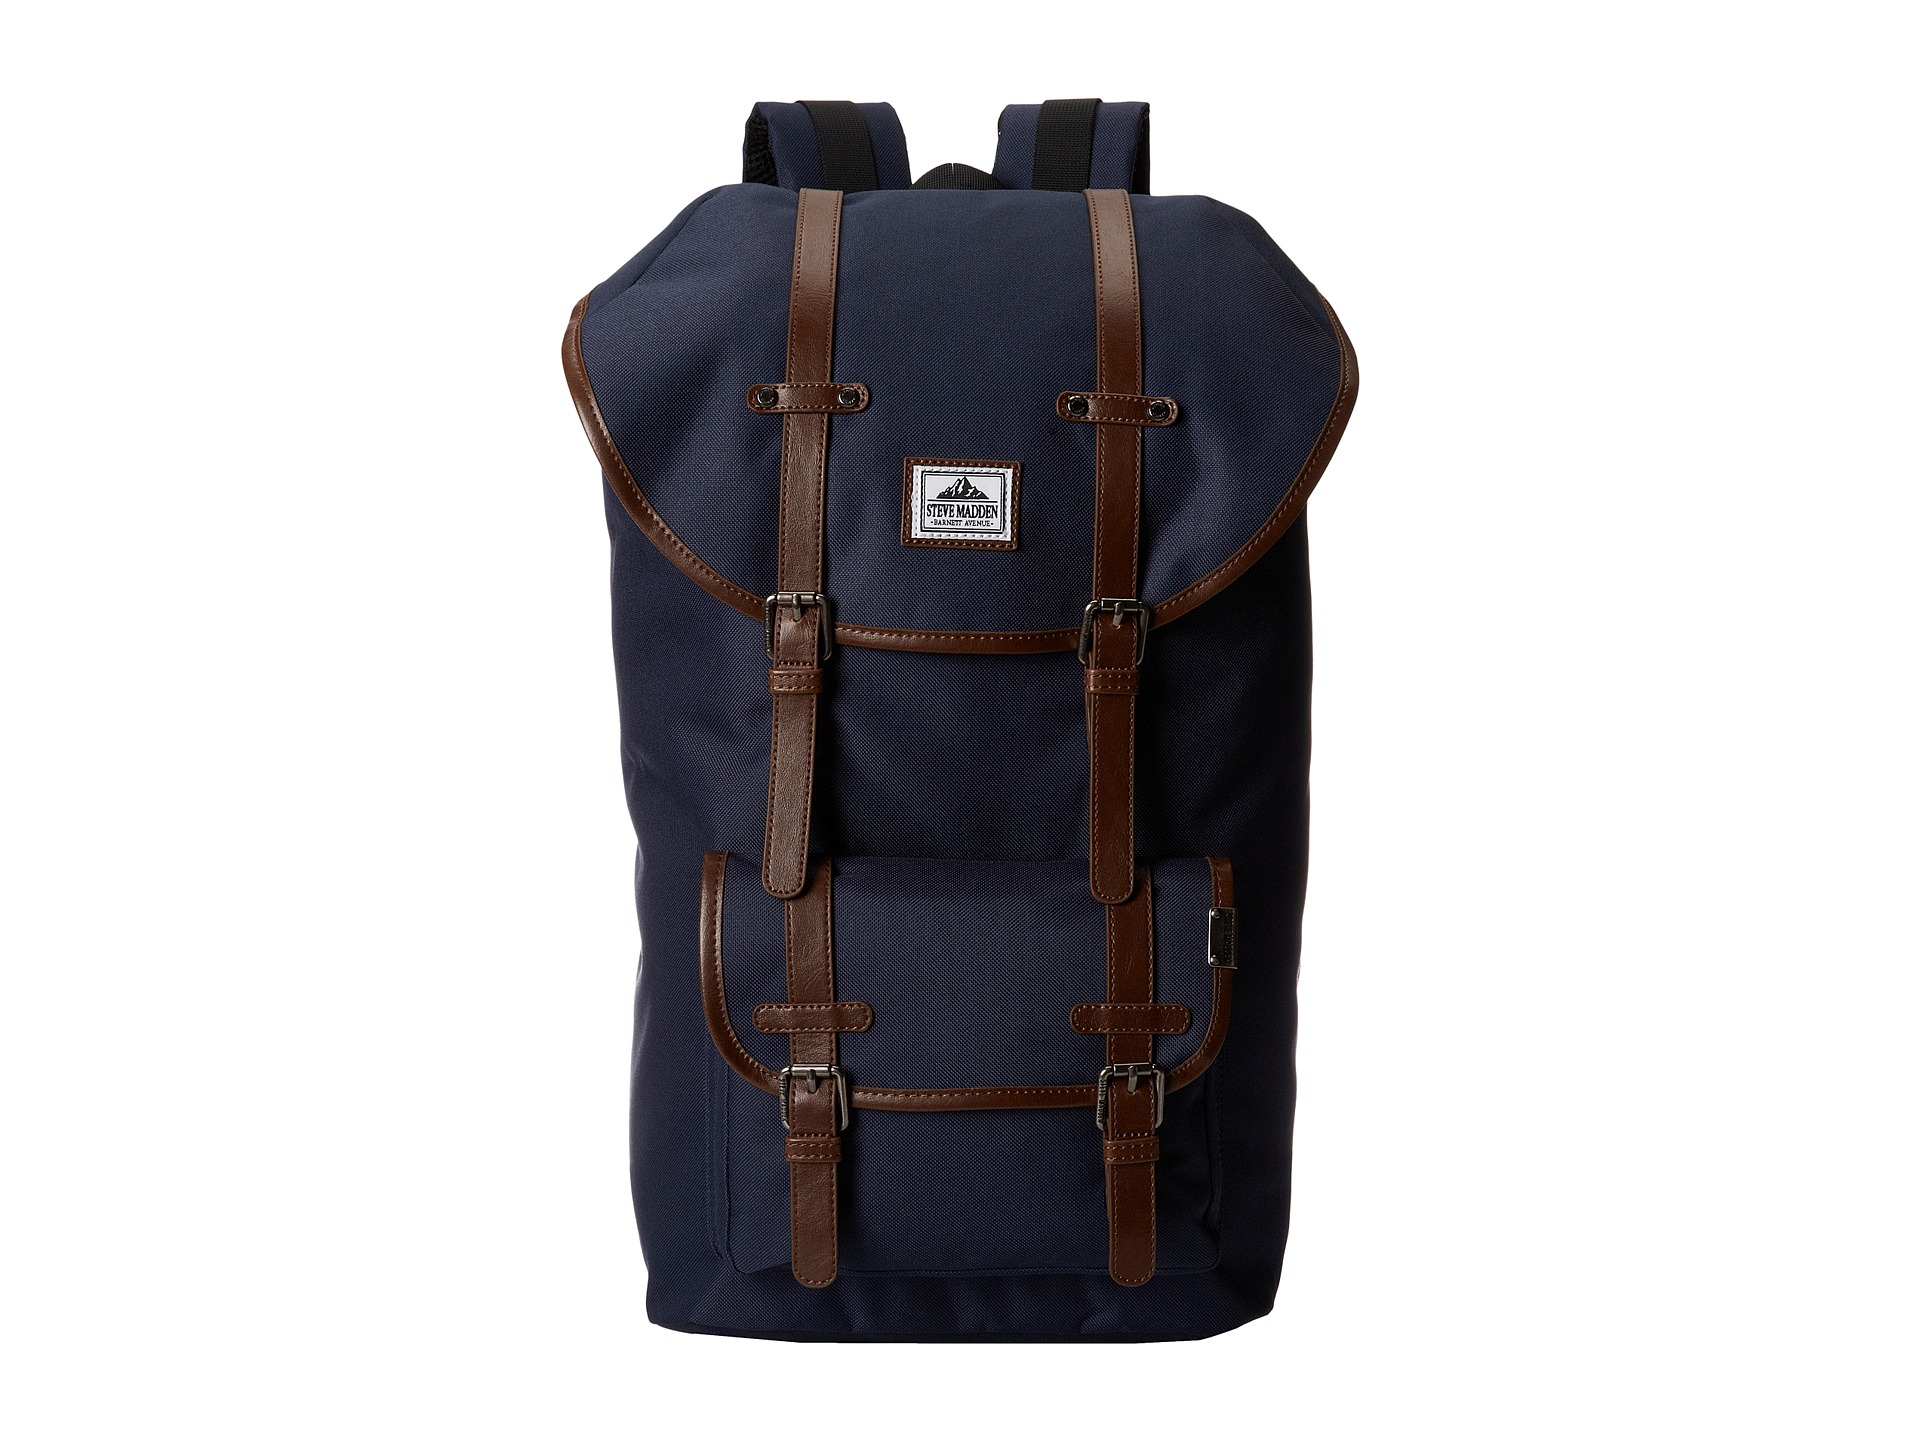 Steve Madden Sport Utility Backpack | Shipped Free at Zappos